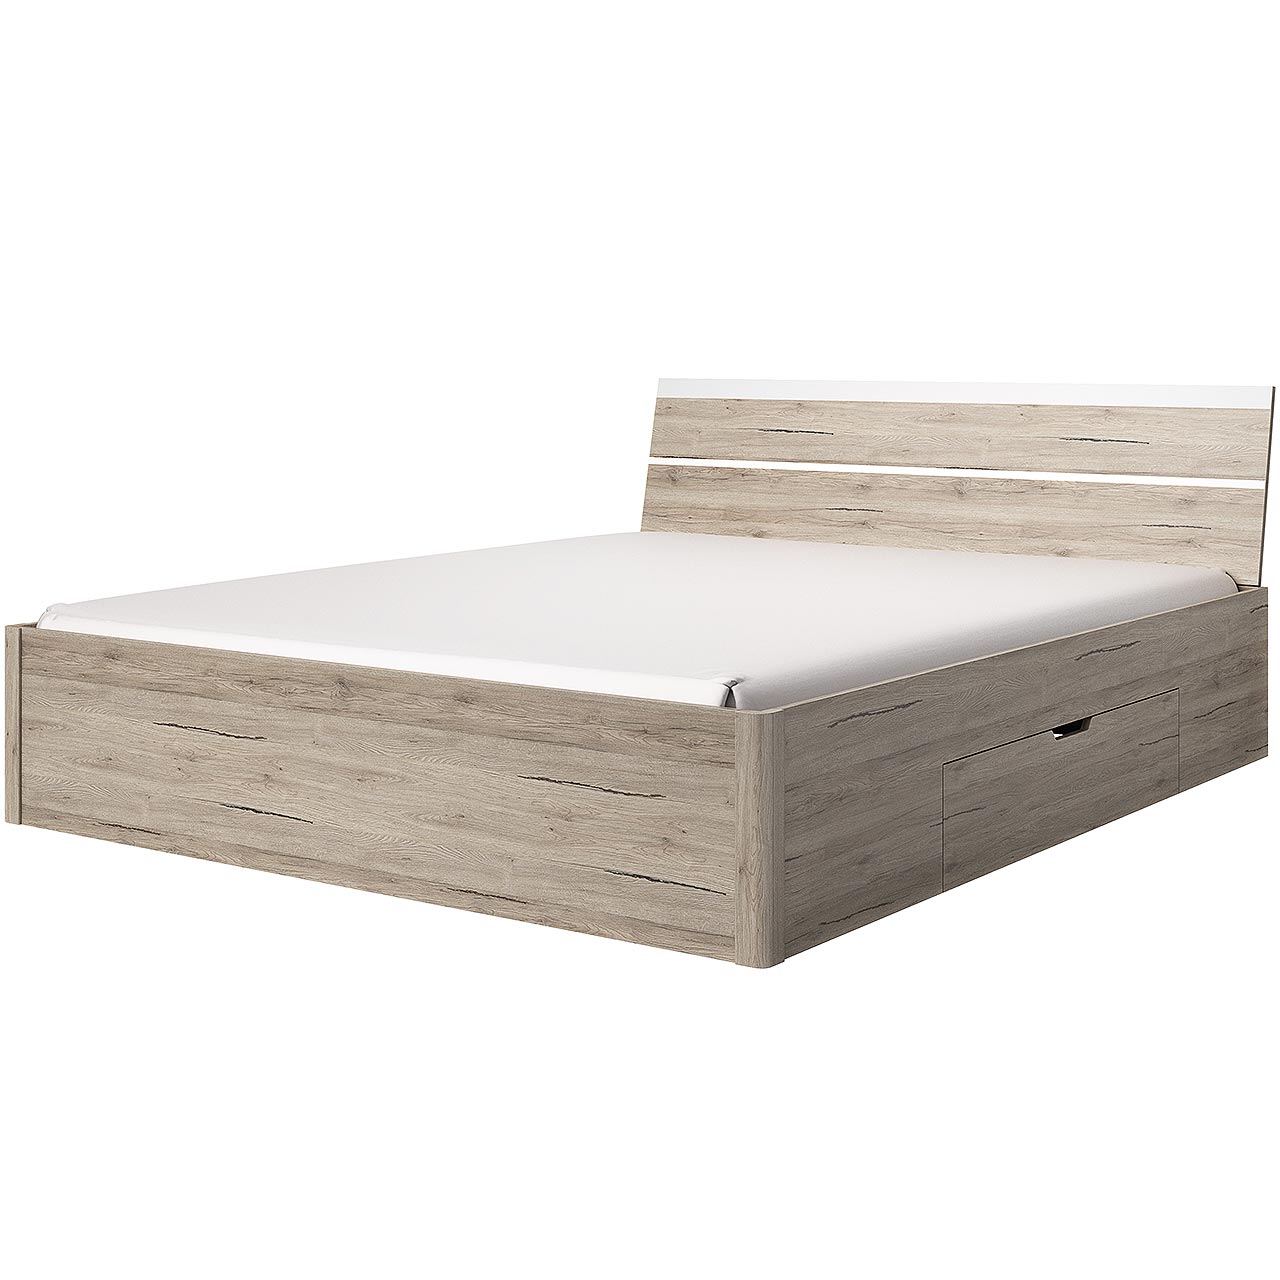 Bed with drawers 180x200 BETA BE52 san remo light / white